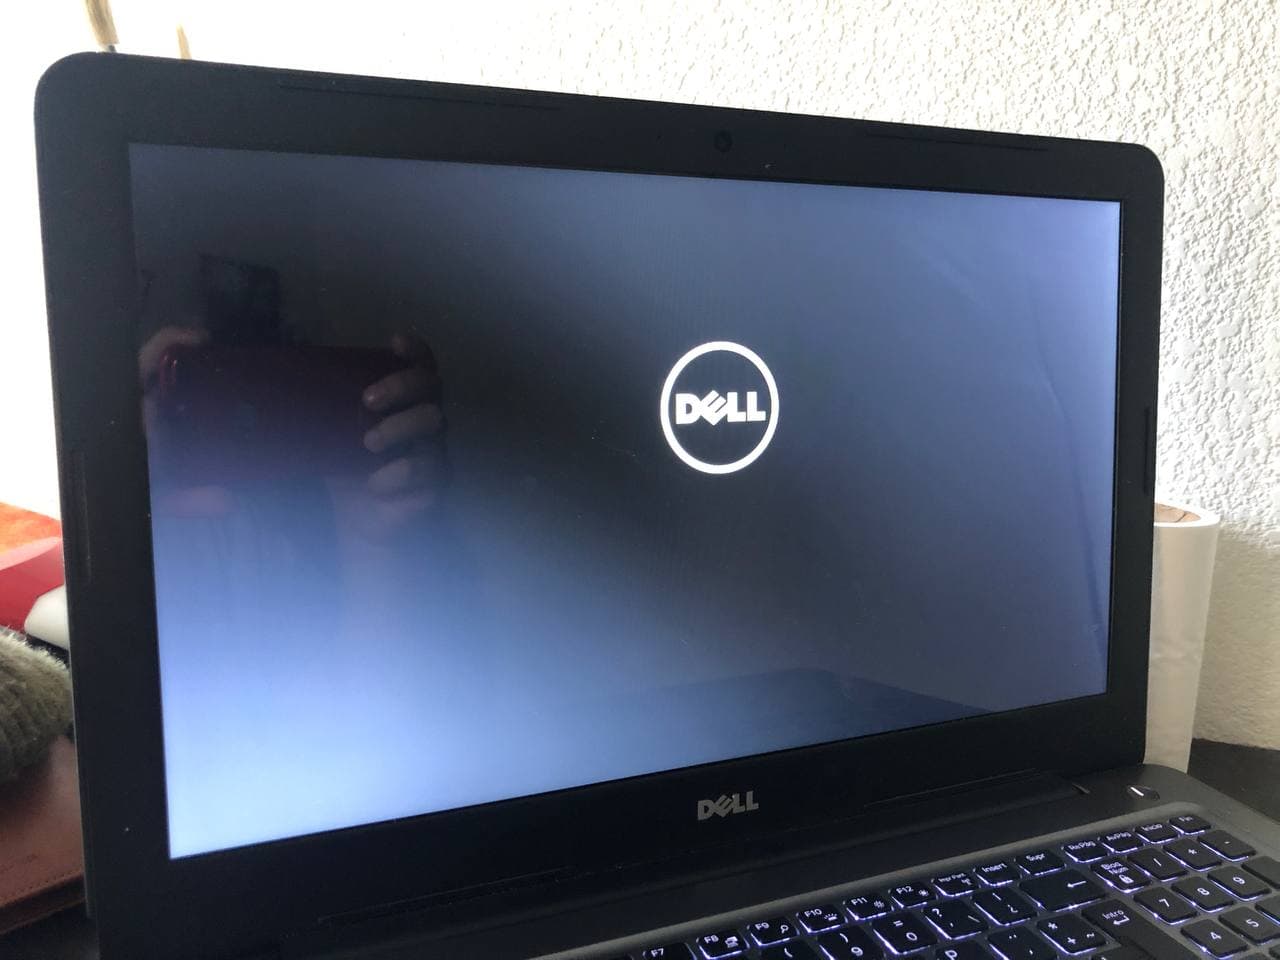 Laptop windows 10 stuck in resetting for almost 24 hours 0dde66df-5211-435f-8d1b-01bbbf1f407c?upload=true.jpg